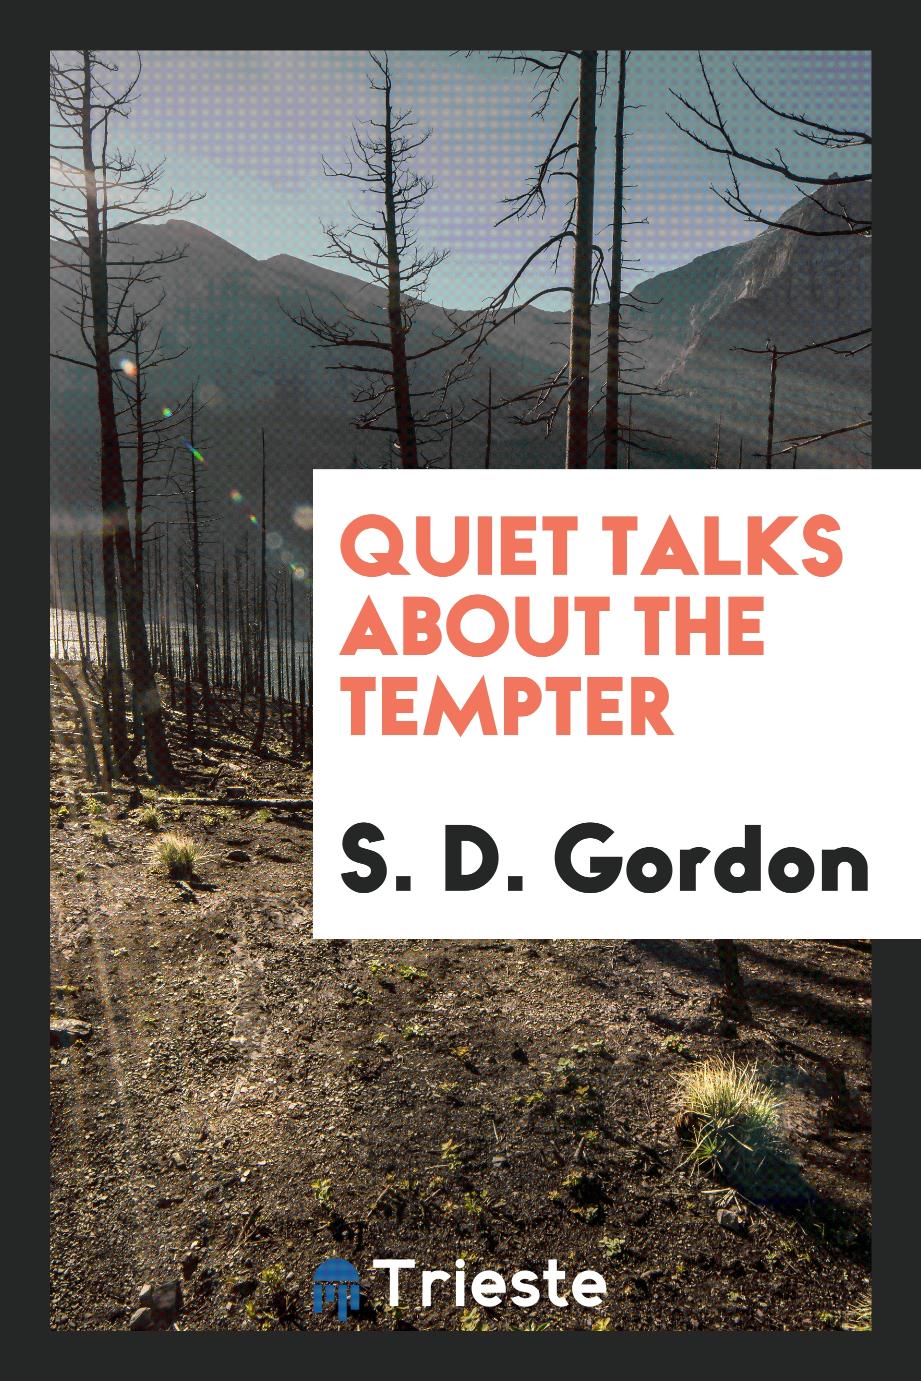 Quiet talks about the tempter